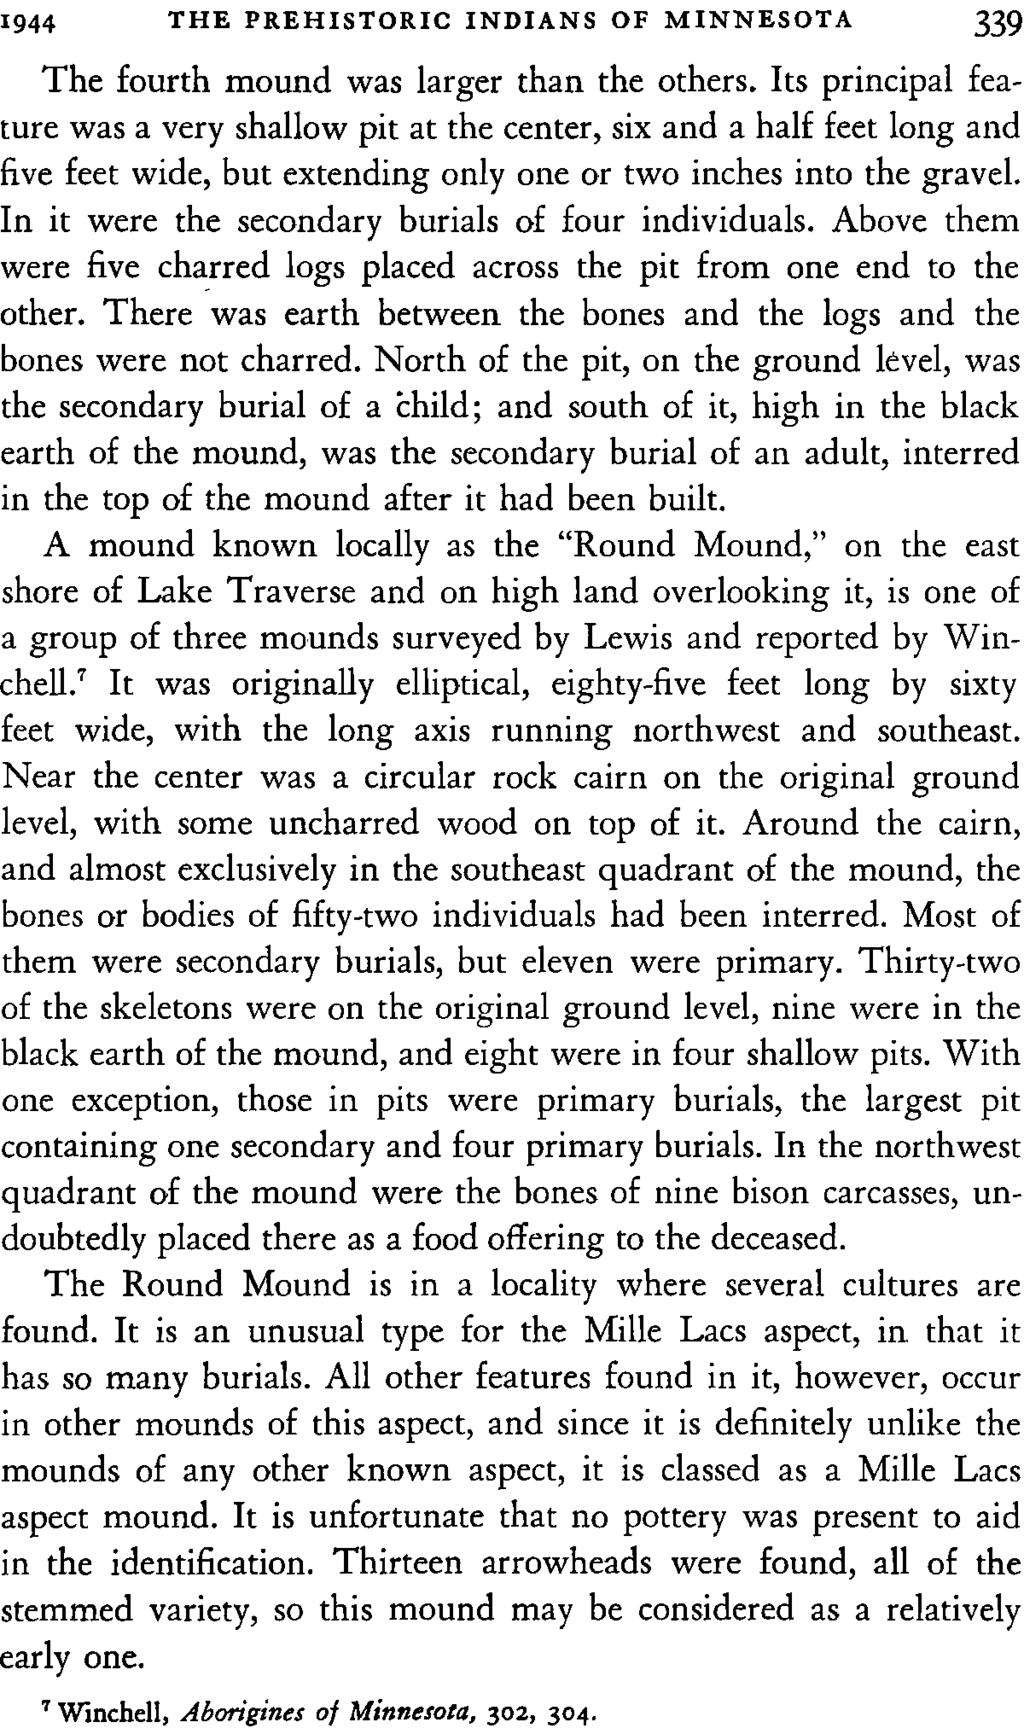 1944 THE PREHISTORIC INDIANS OF MINNESOTA 339 The fourth mound was larger than the others.